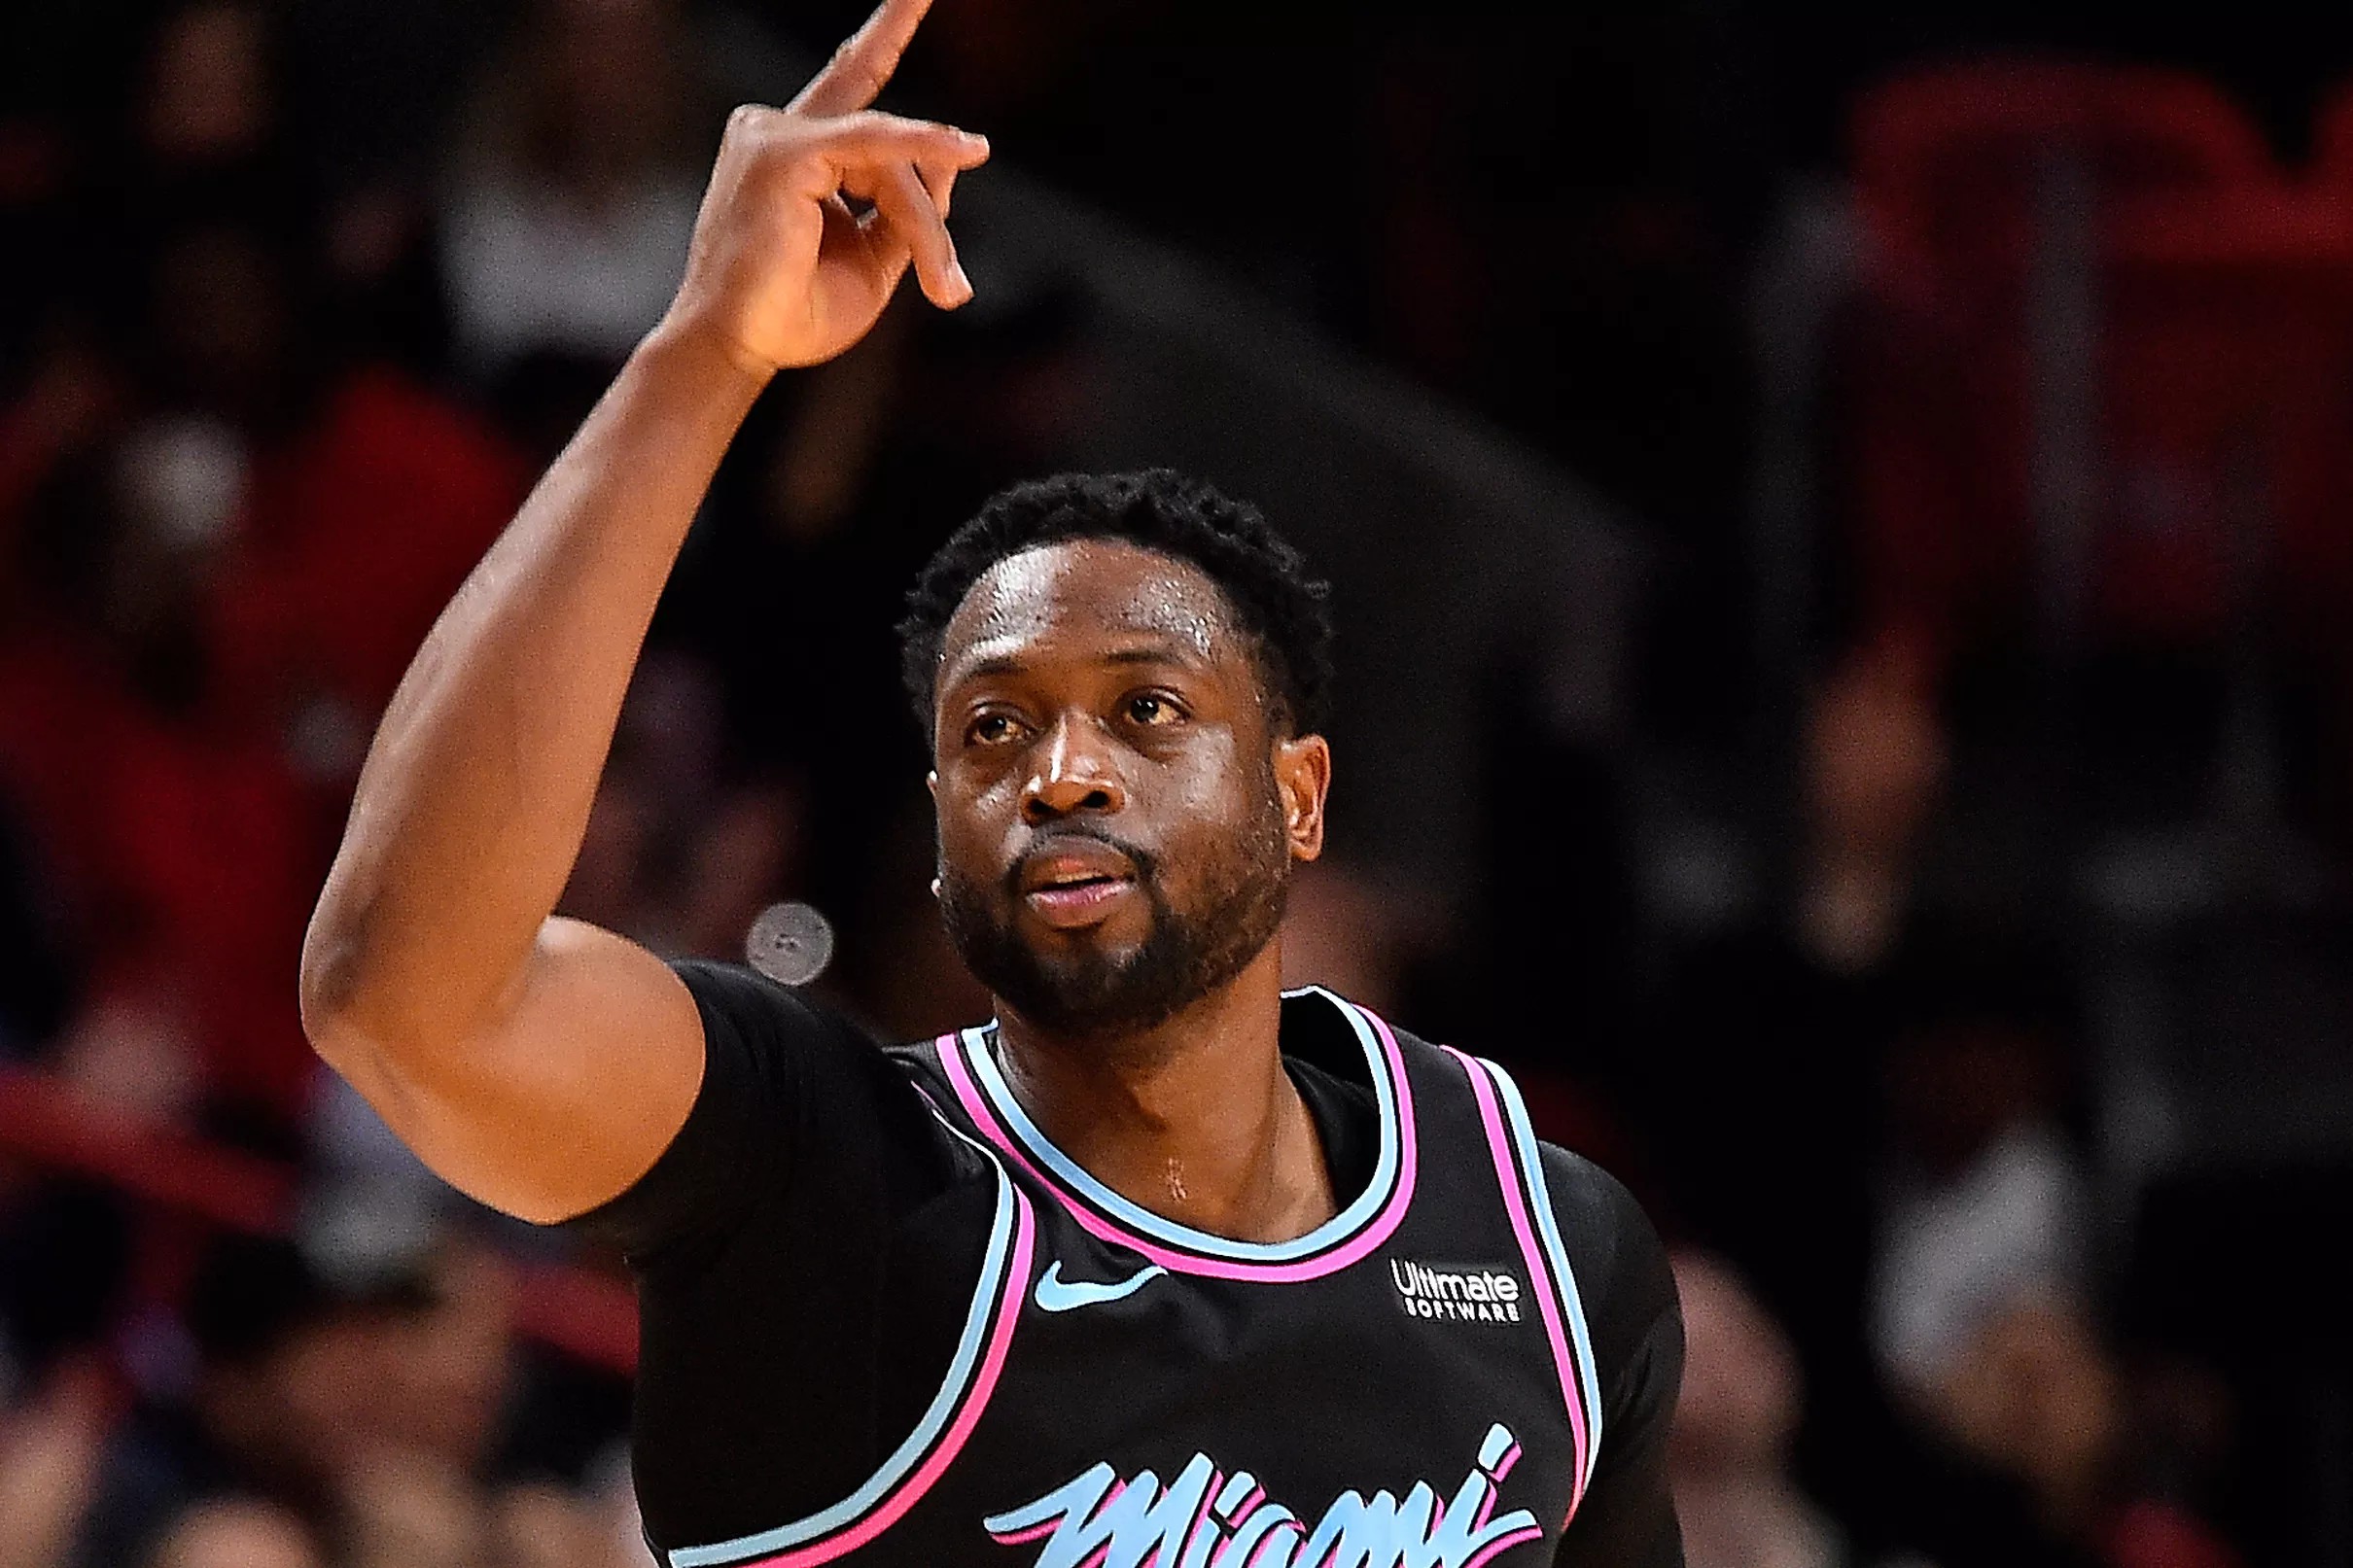 Dwyane Wade continues to serve as a balancer for the Miami Heat